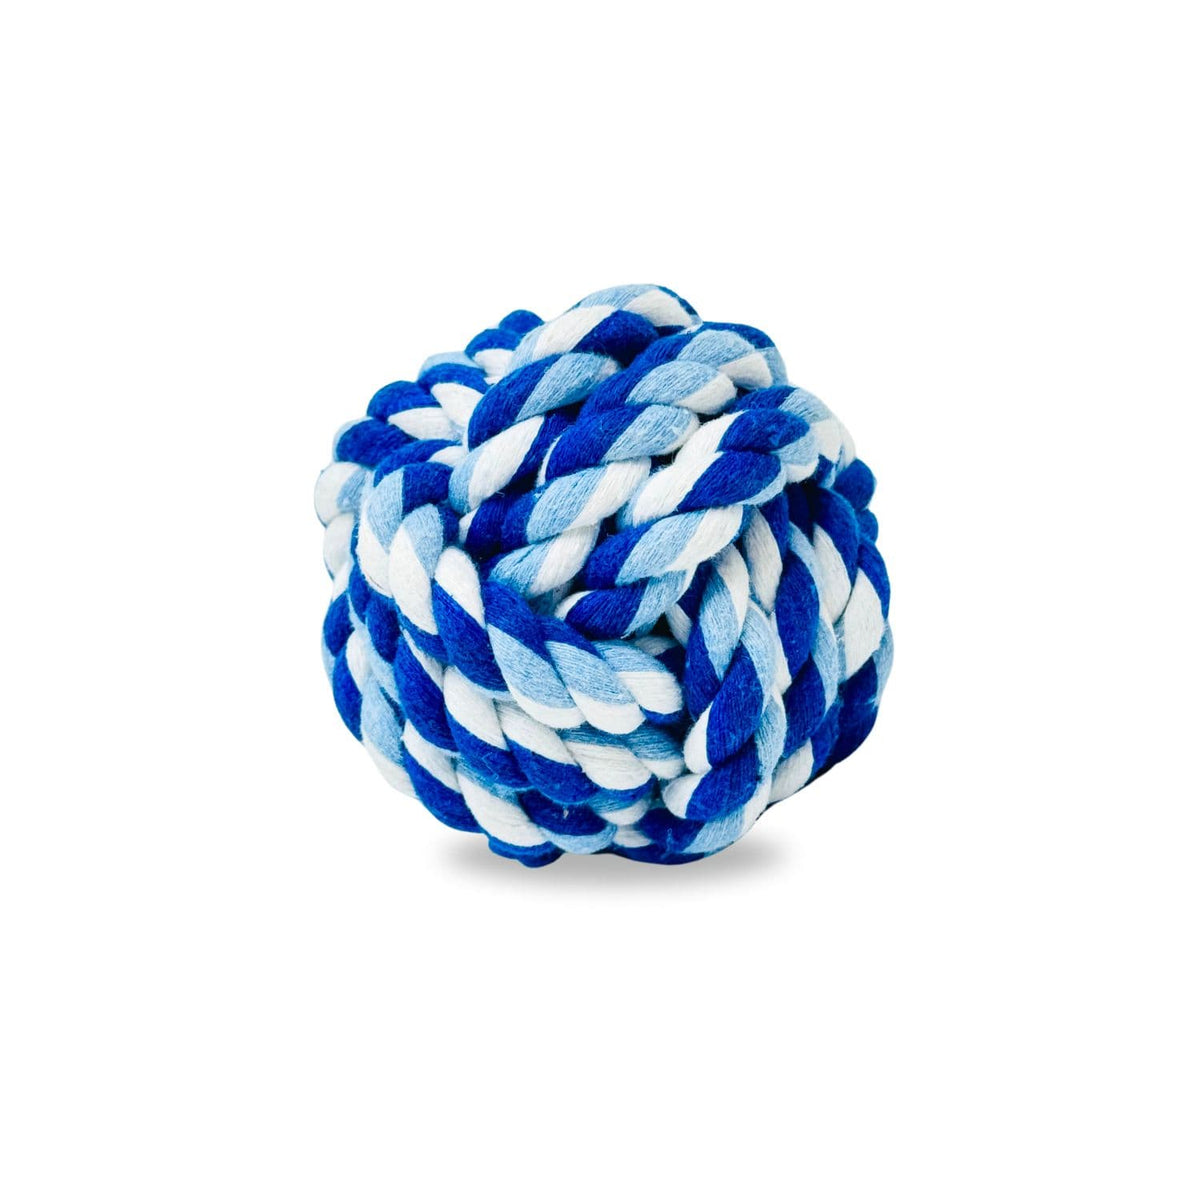 Small 8cm Rope Ball Fetch Toy